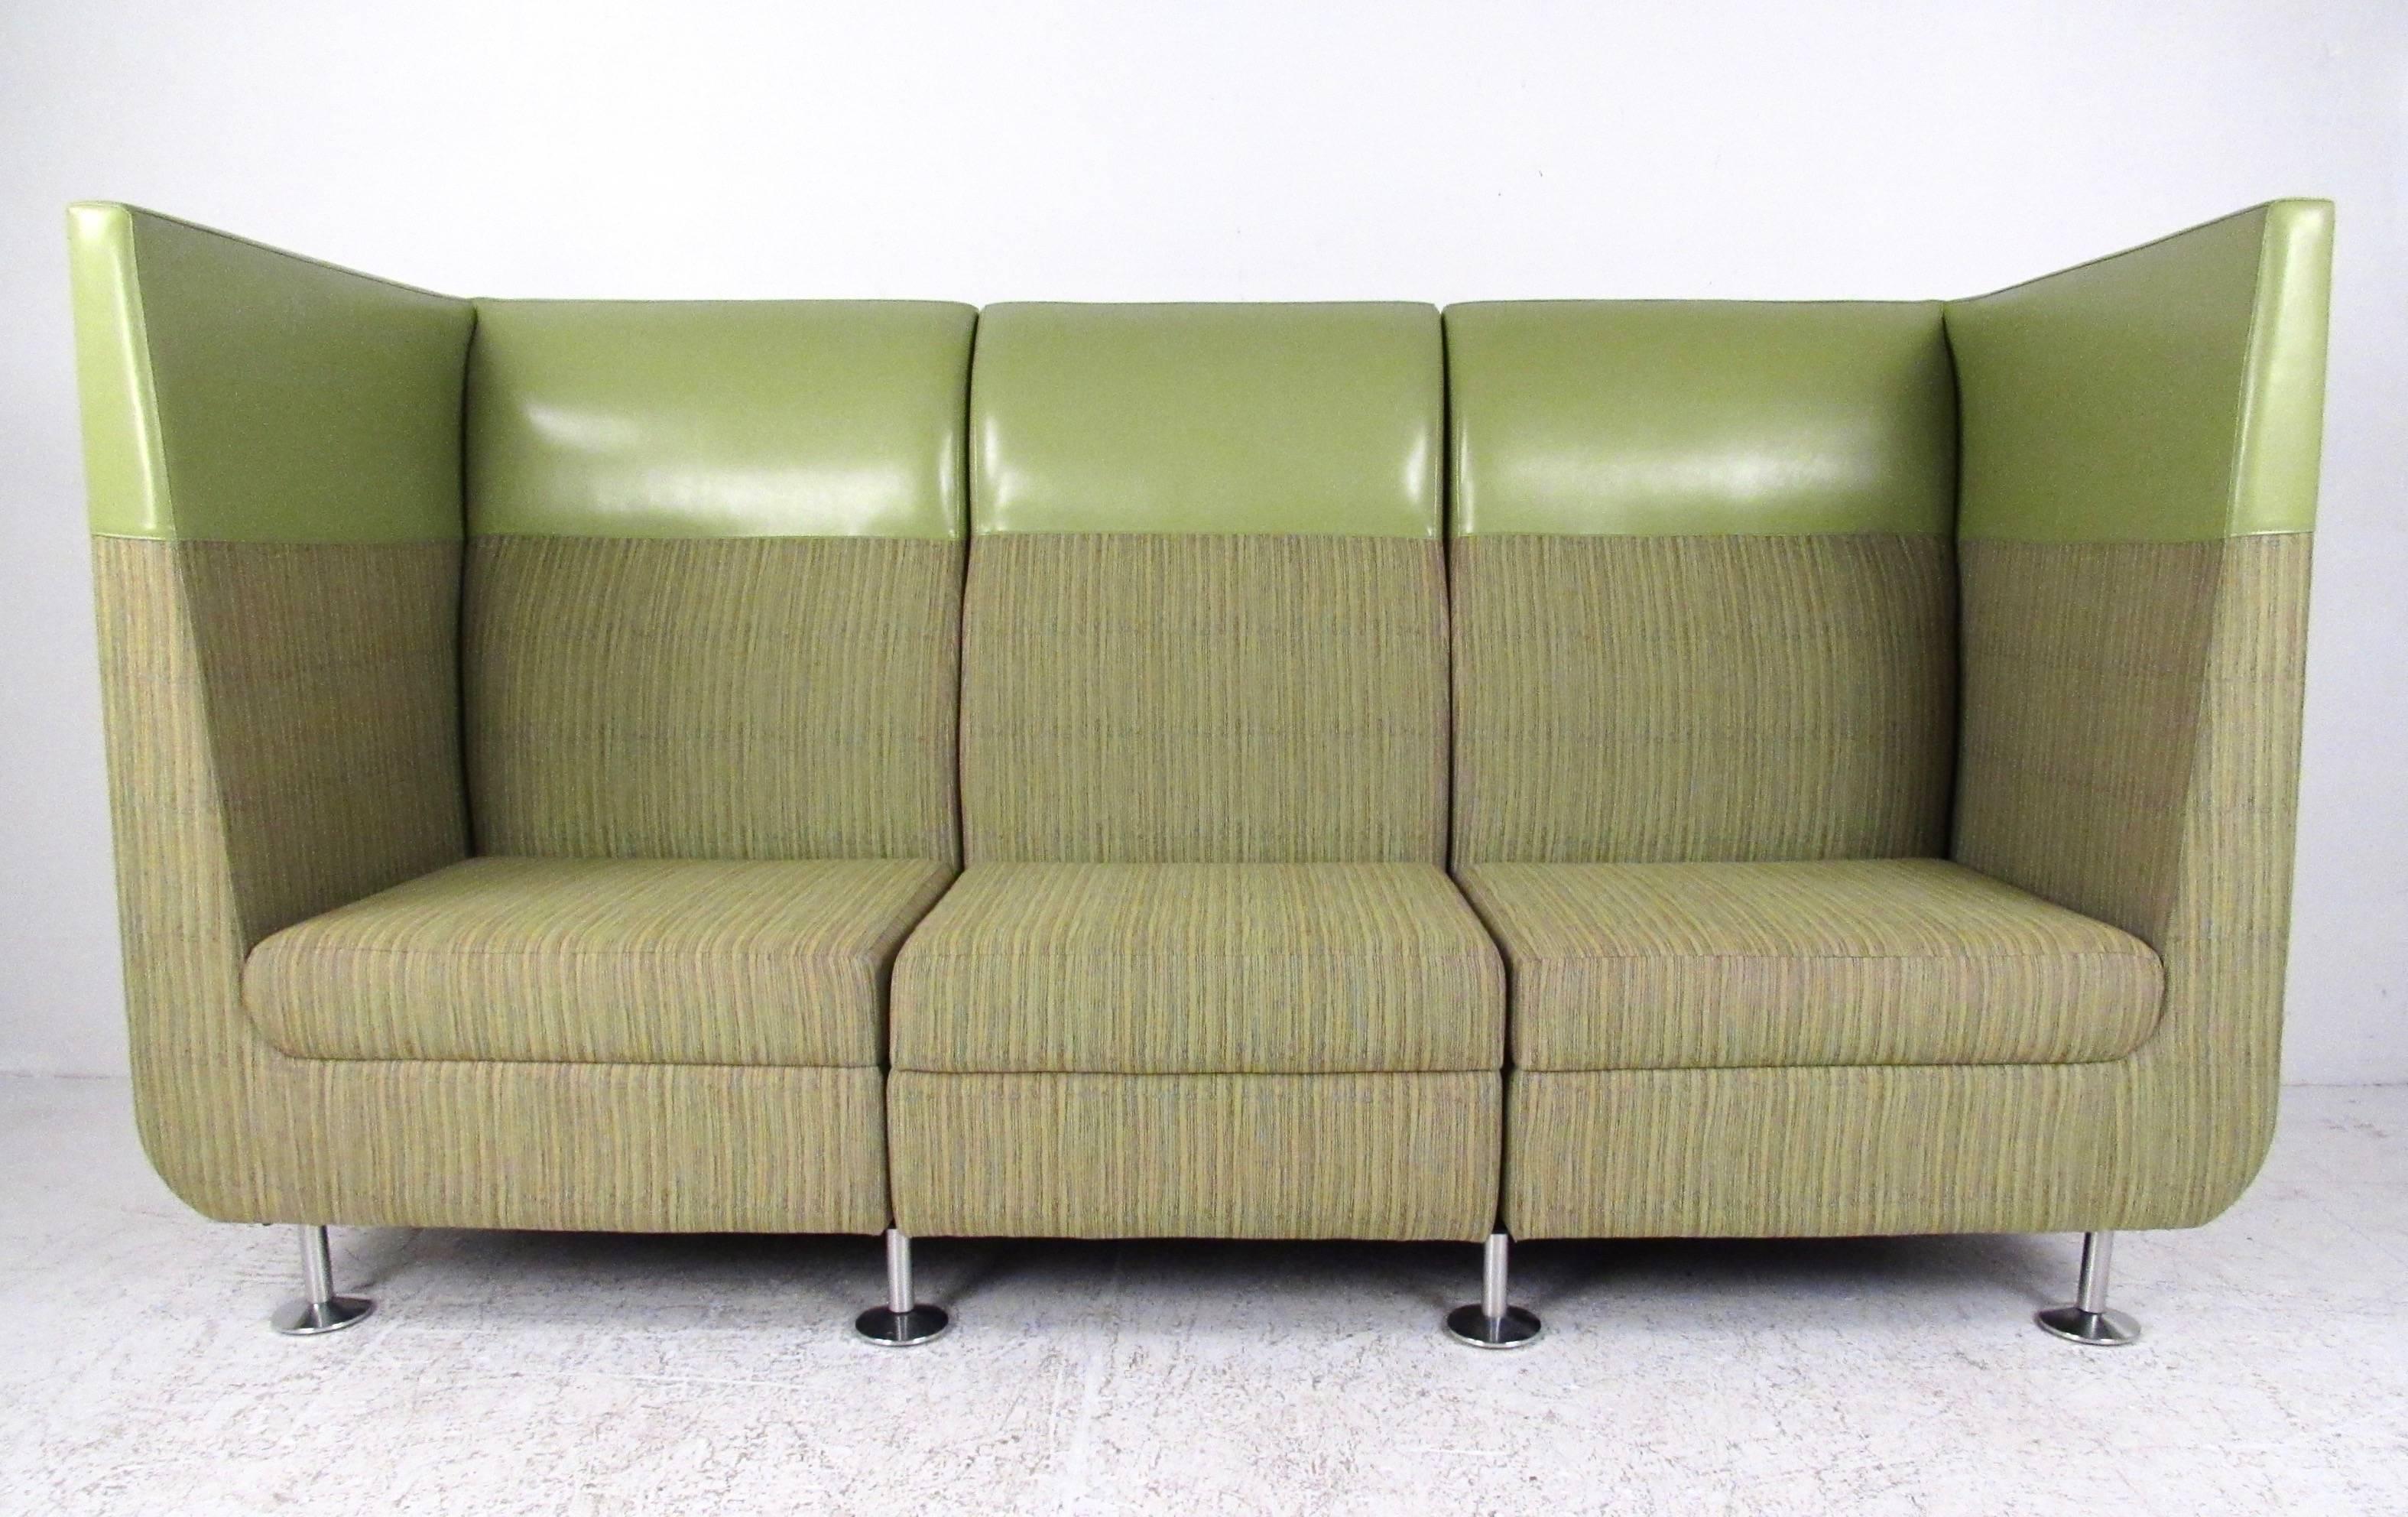 This unique modern sofa features three-seat sectional design in a mixed green covering. Chrome finish legs and clean modern lines add to the appeal of this restaurant booth like sofa. Large contemporary sofa makes a striking seating addition to